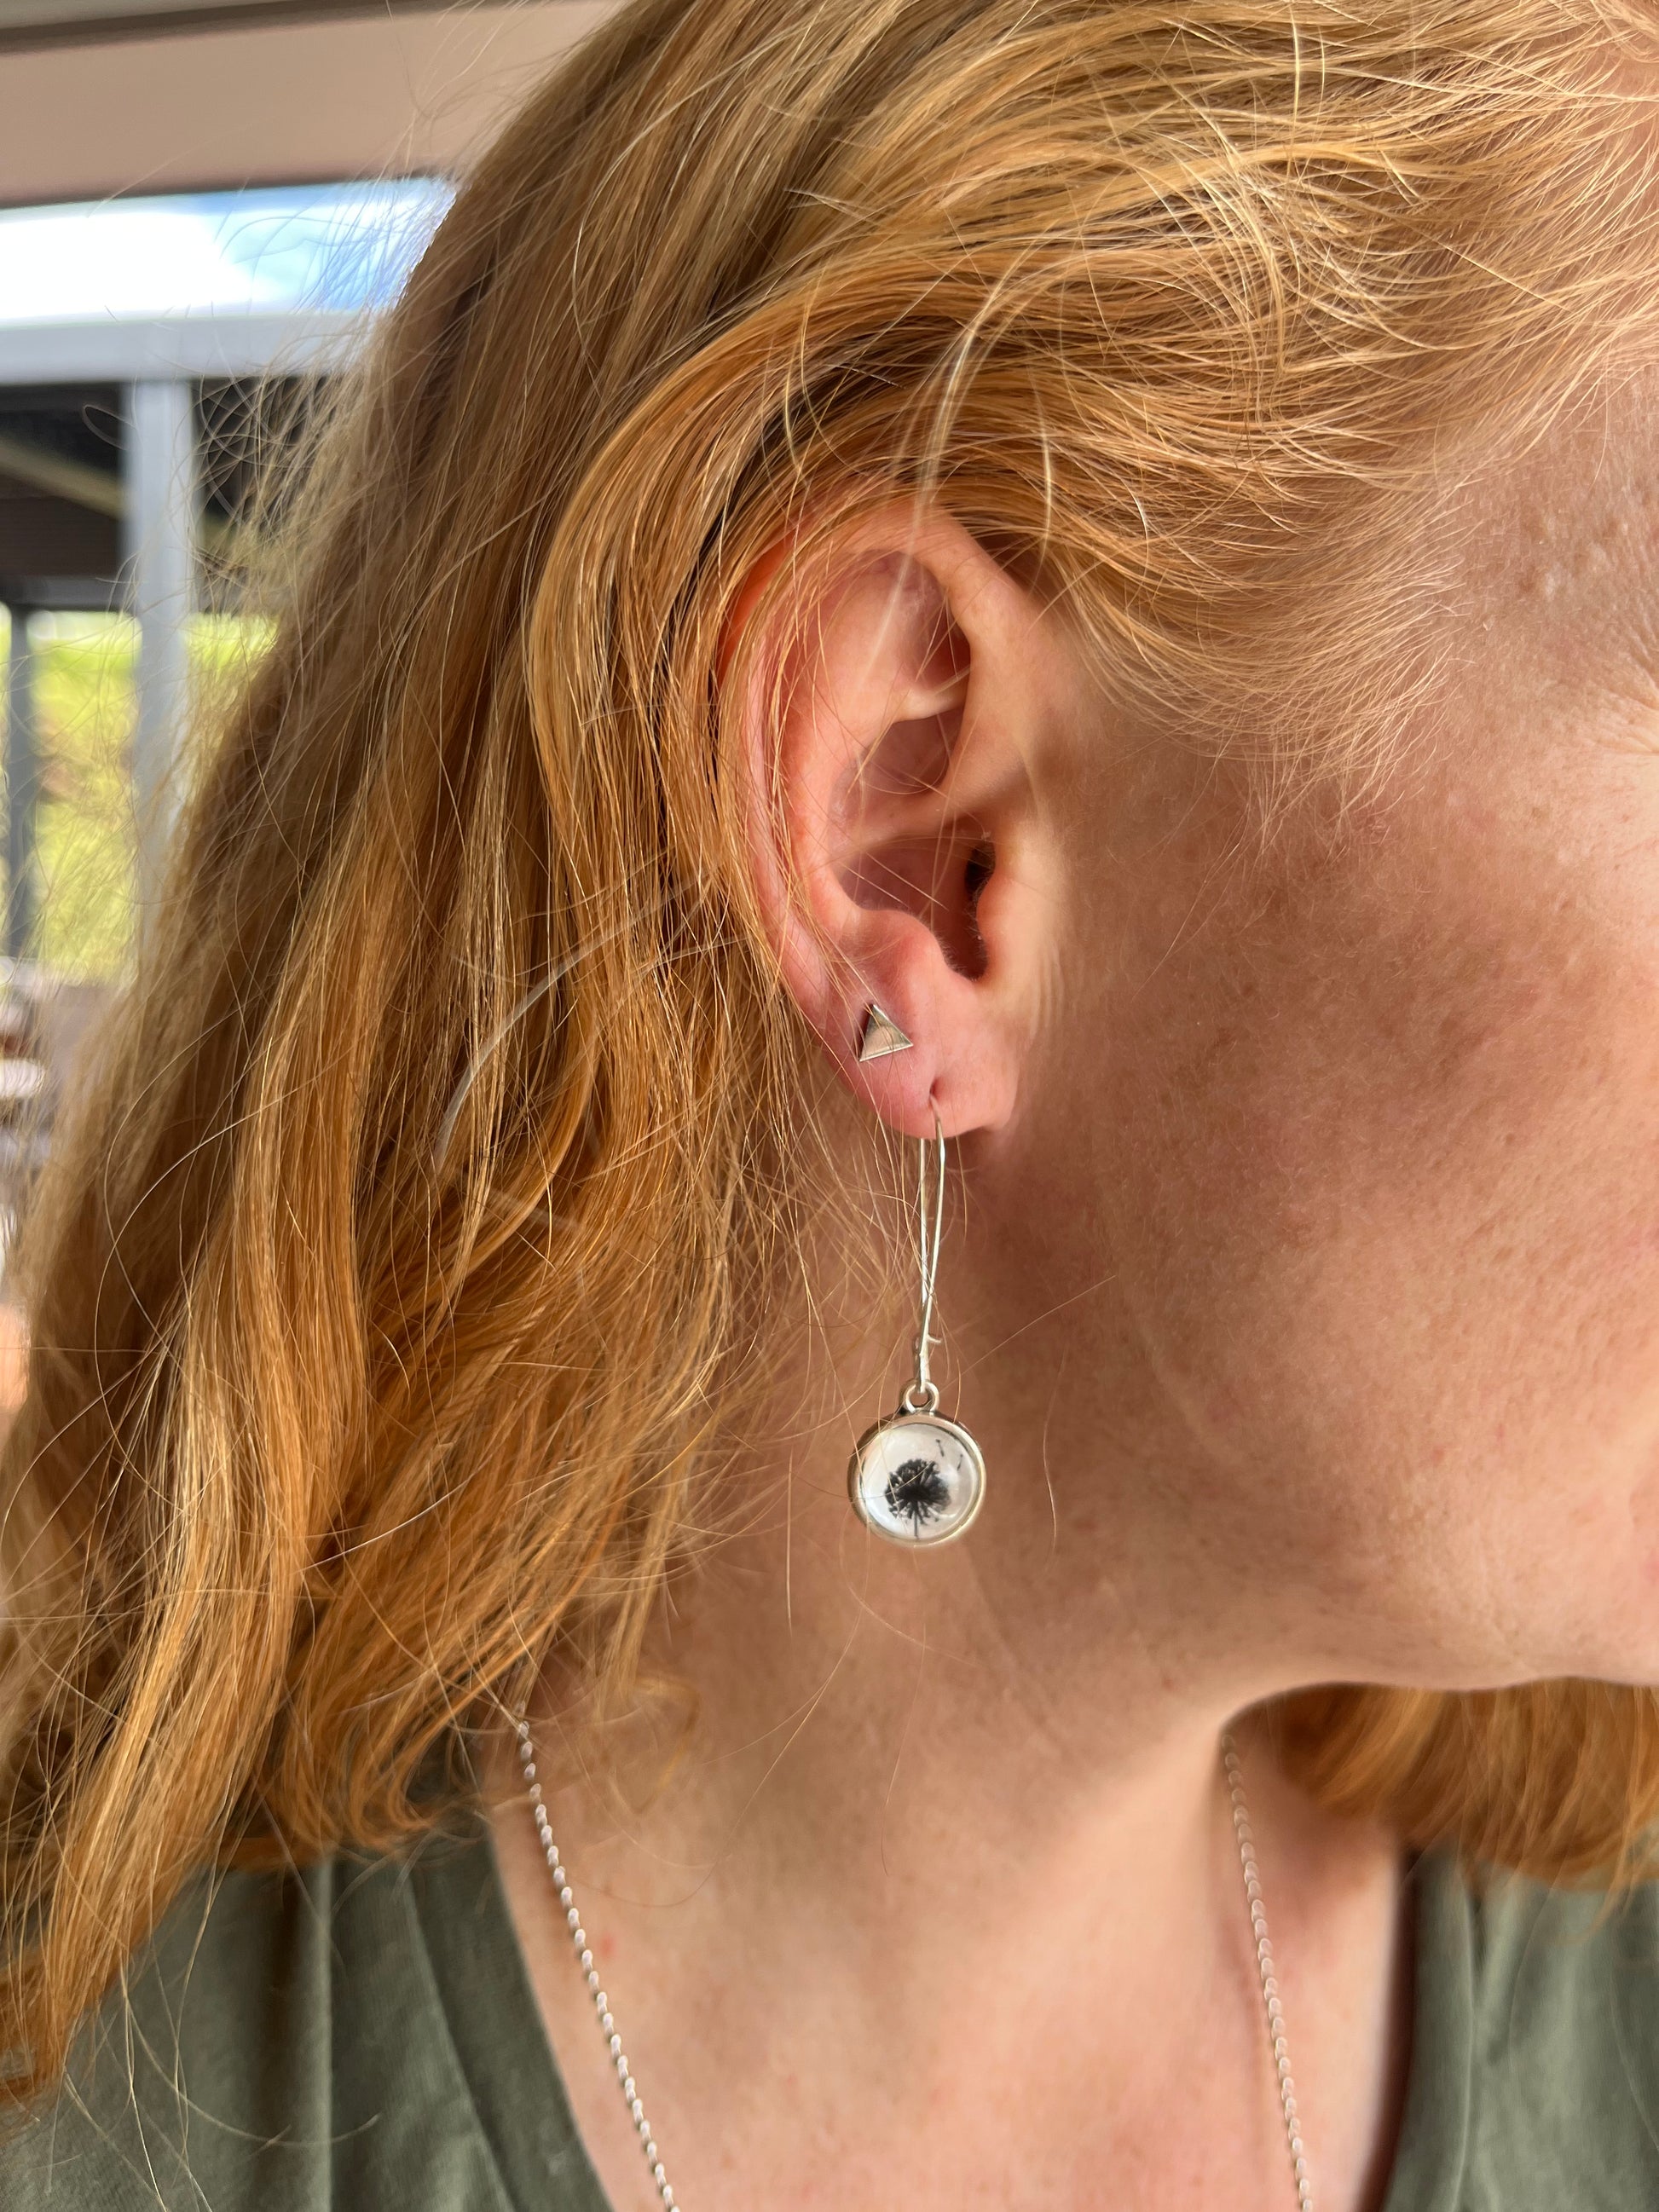 Double sided glass dome earrings with a dandelion